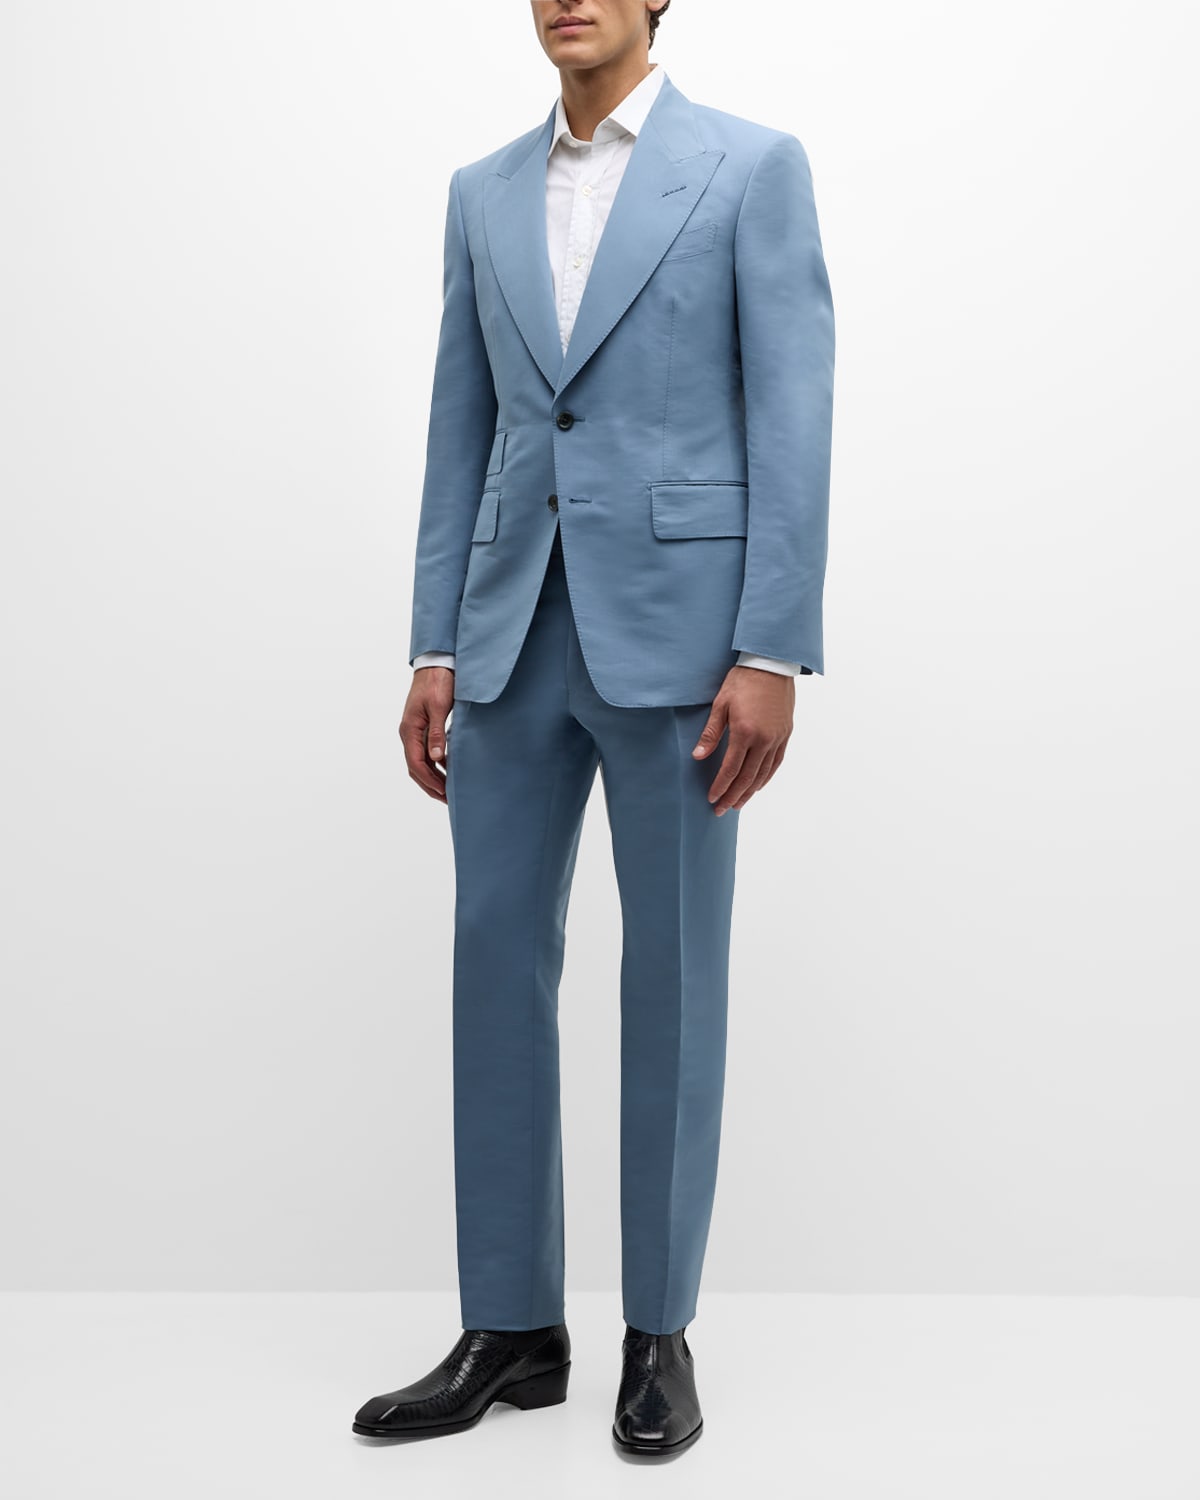 Tom Ford Men's Shelton Piece-dyed Poplin Suit In Mineral